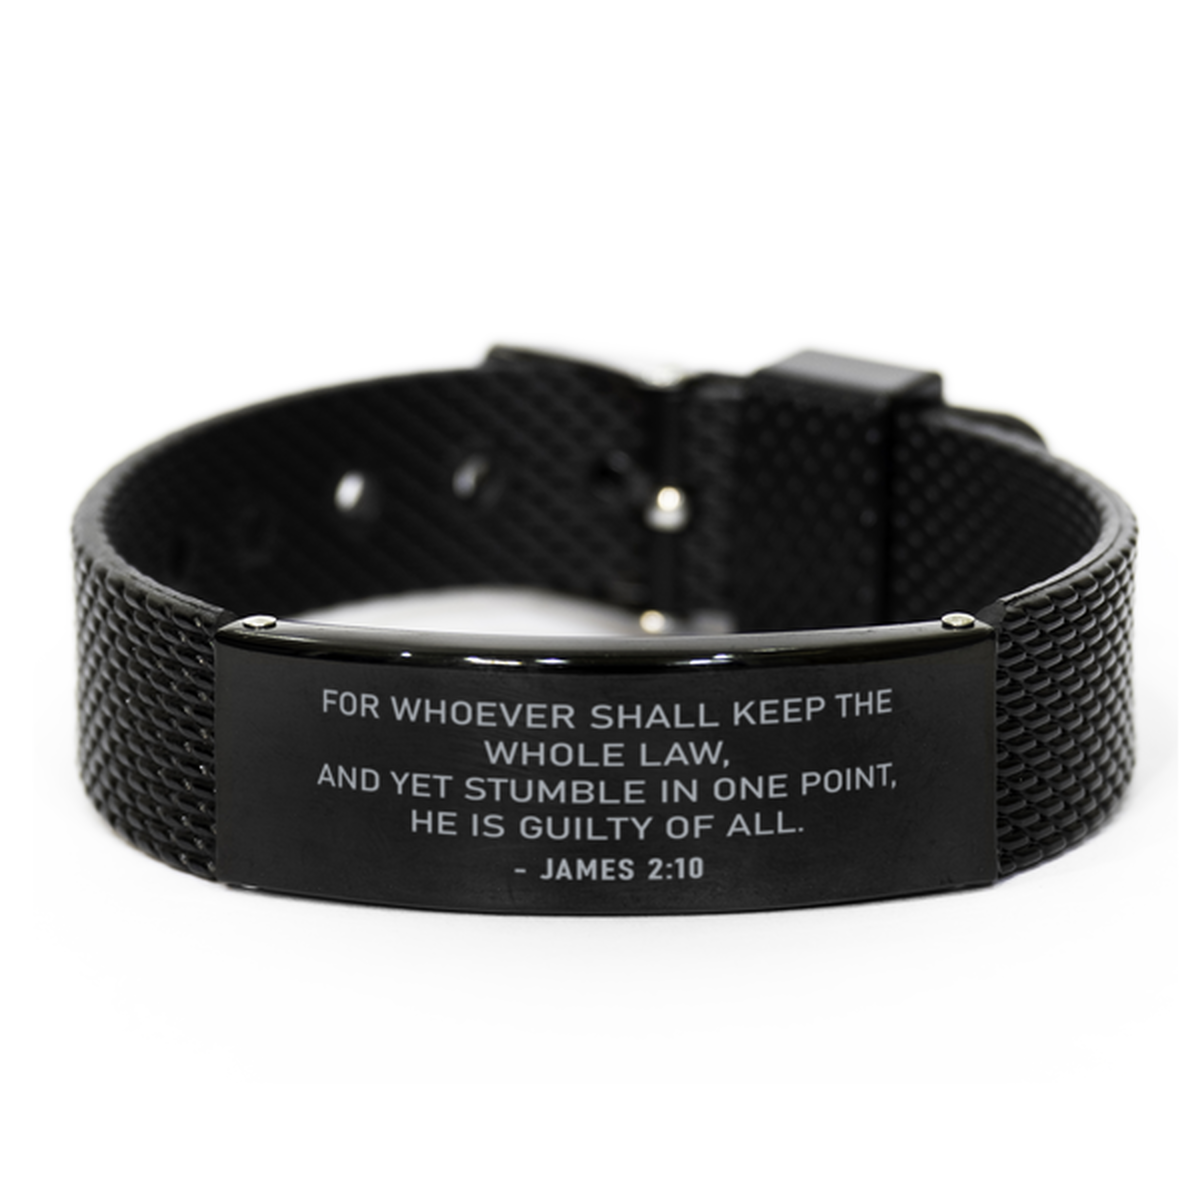 Christian Black Bracelet,, James 2:10 For Whoever Shall Keep The Whole Law, And Yet, Motivational Bible Verse Gifts For Men Women